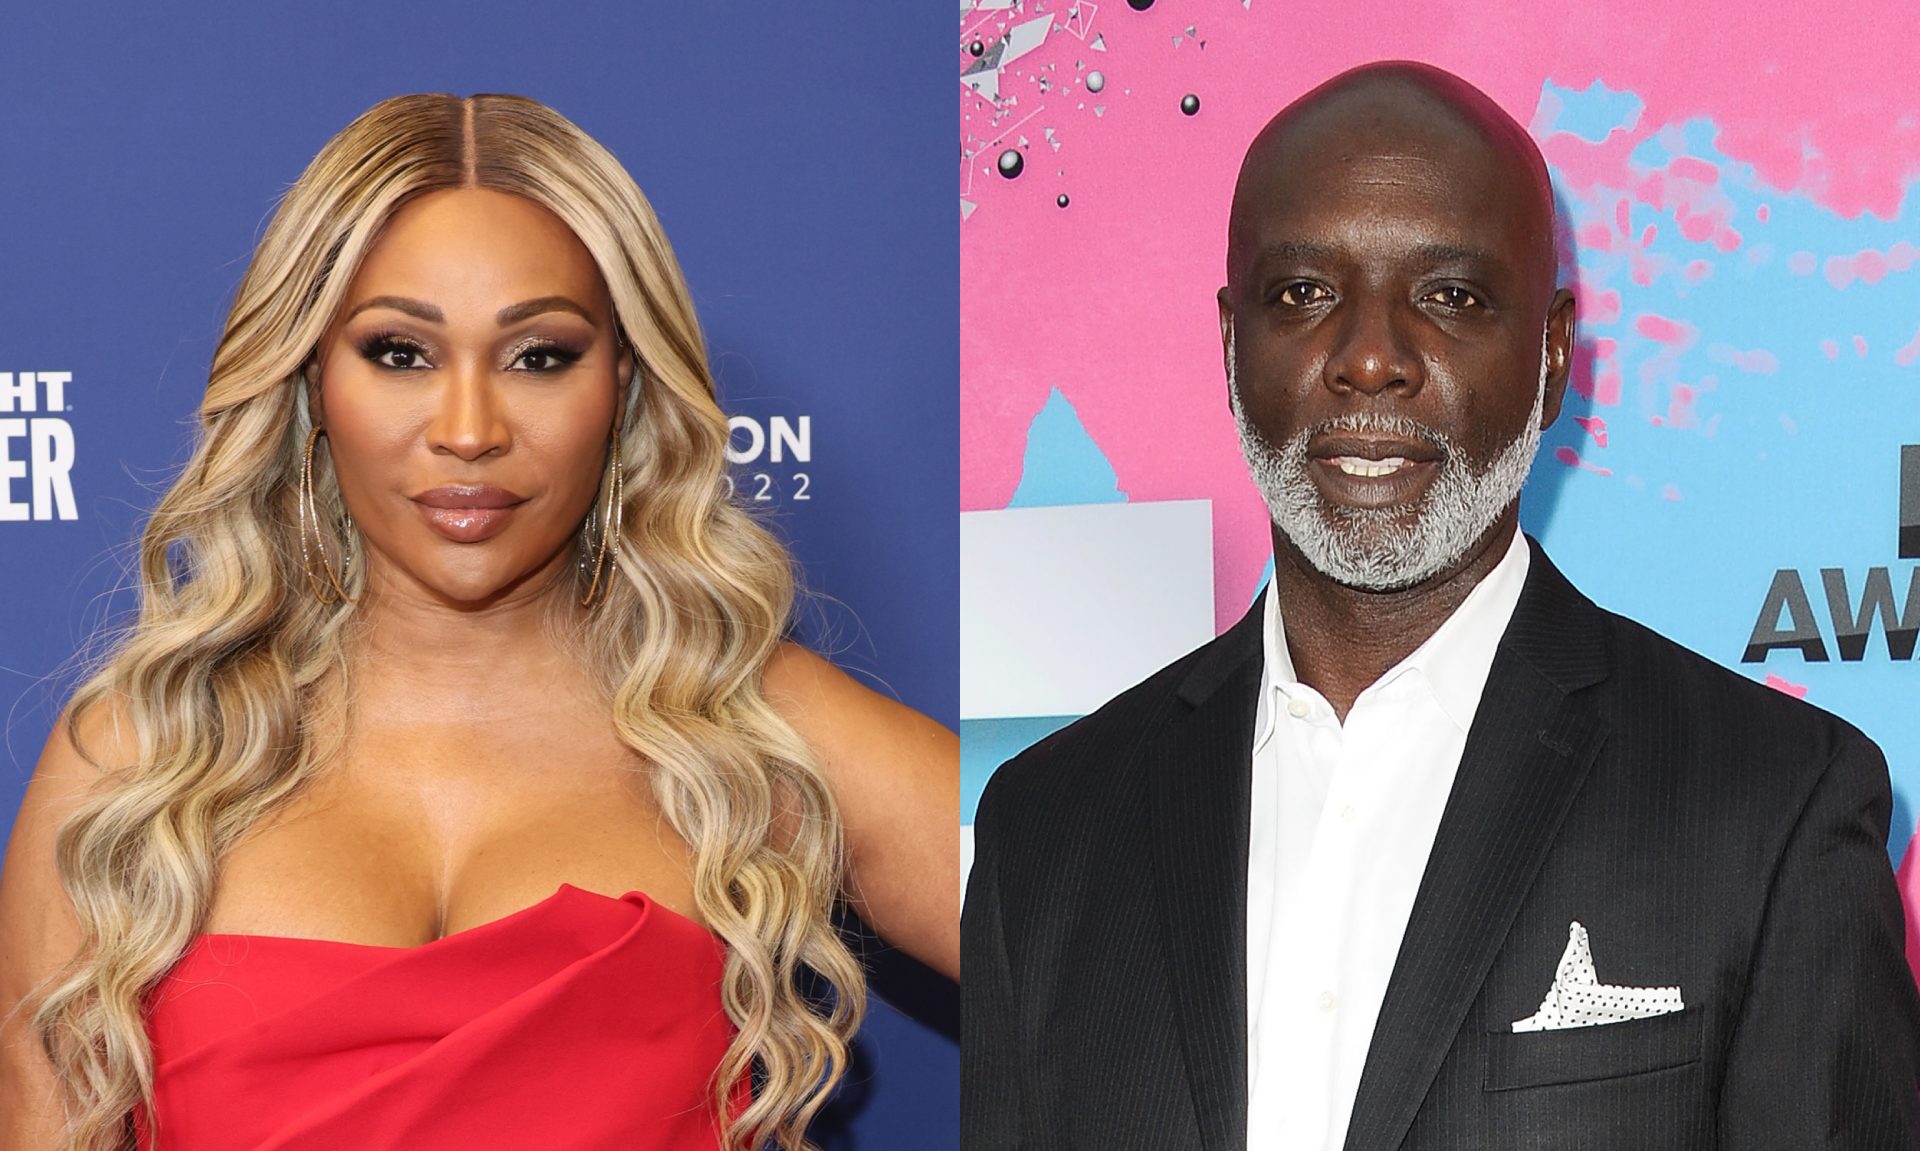 EXCLUSIVE: Cynthia Bailey Is NOT "Coming Home" To Ex-Husband Peter Thomas Despite Suggestive Post